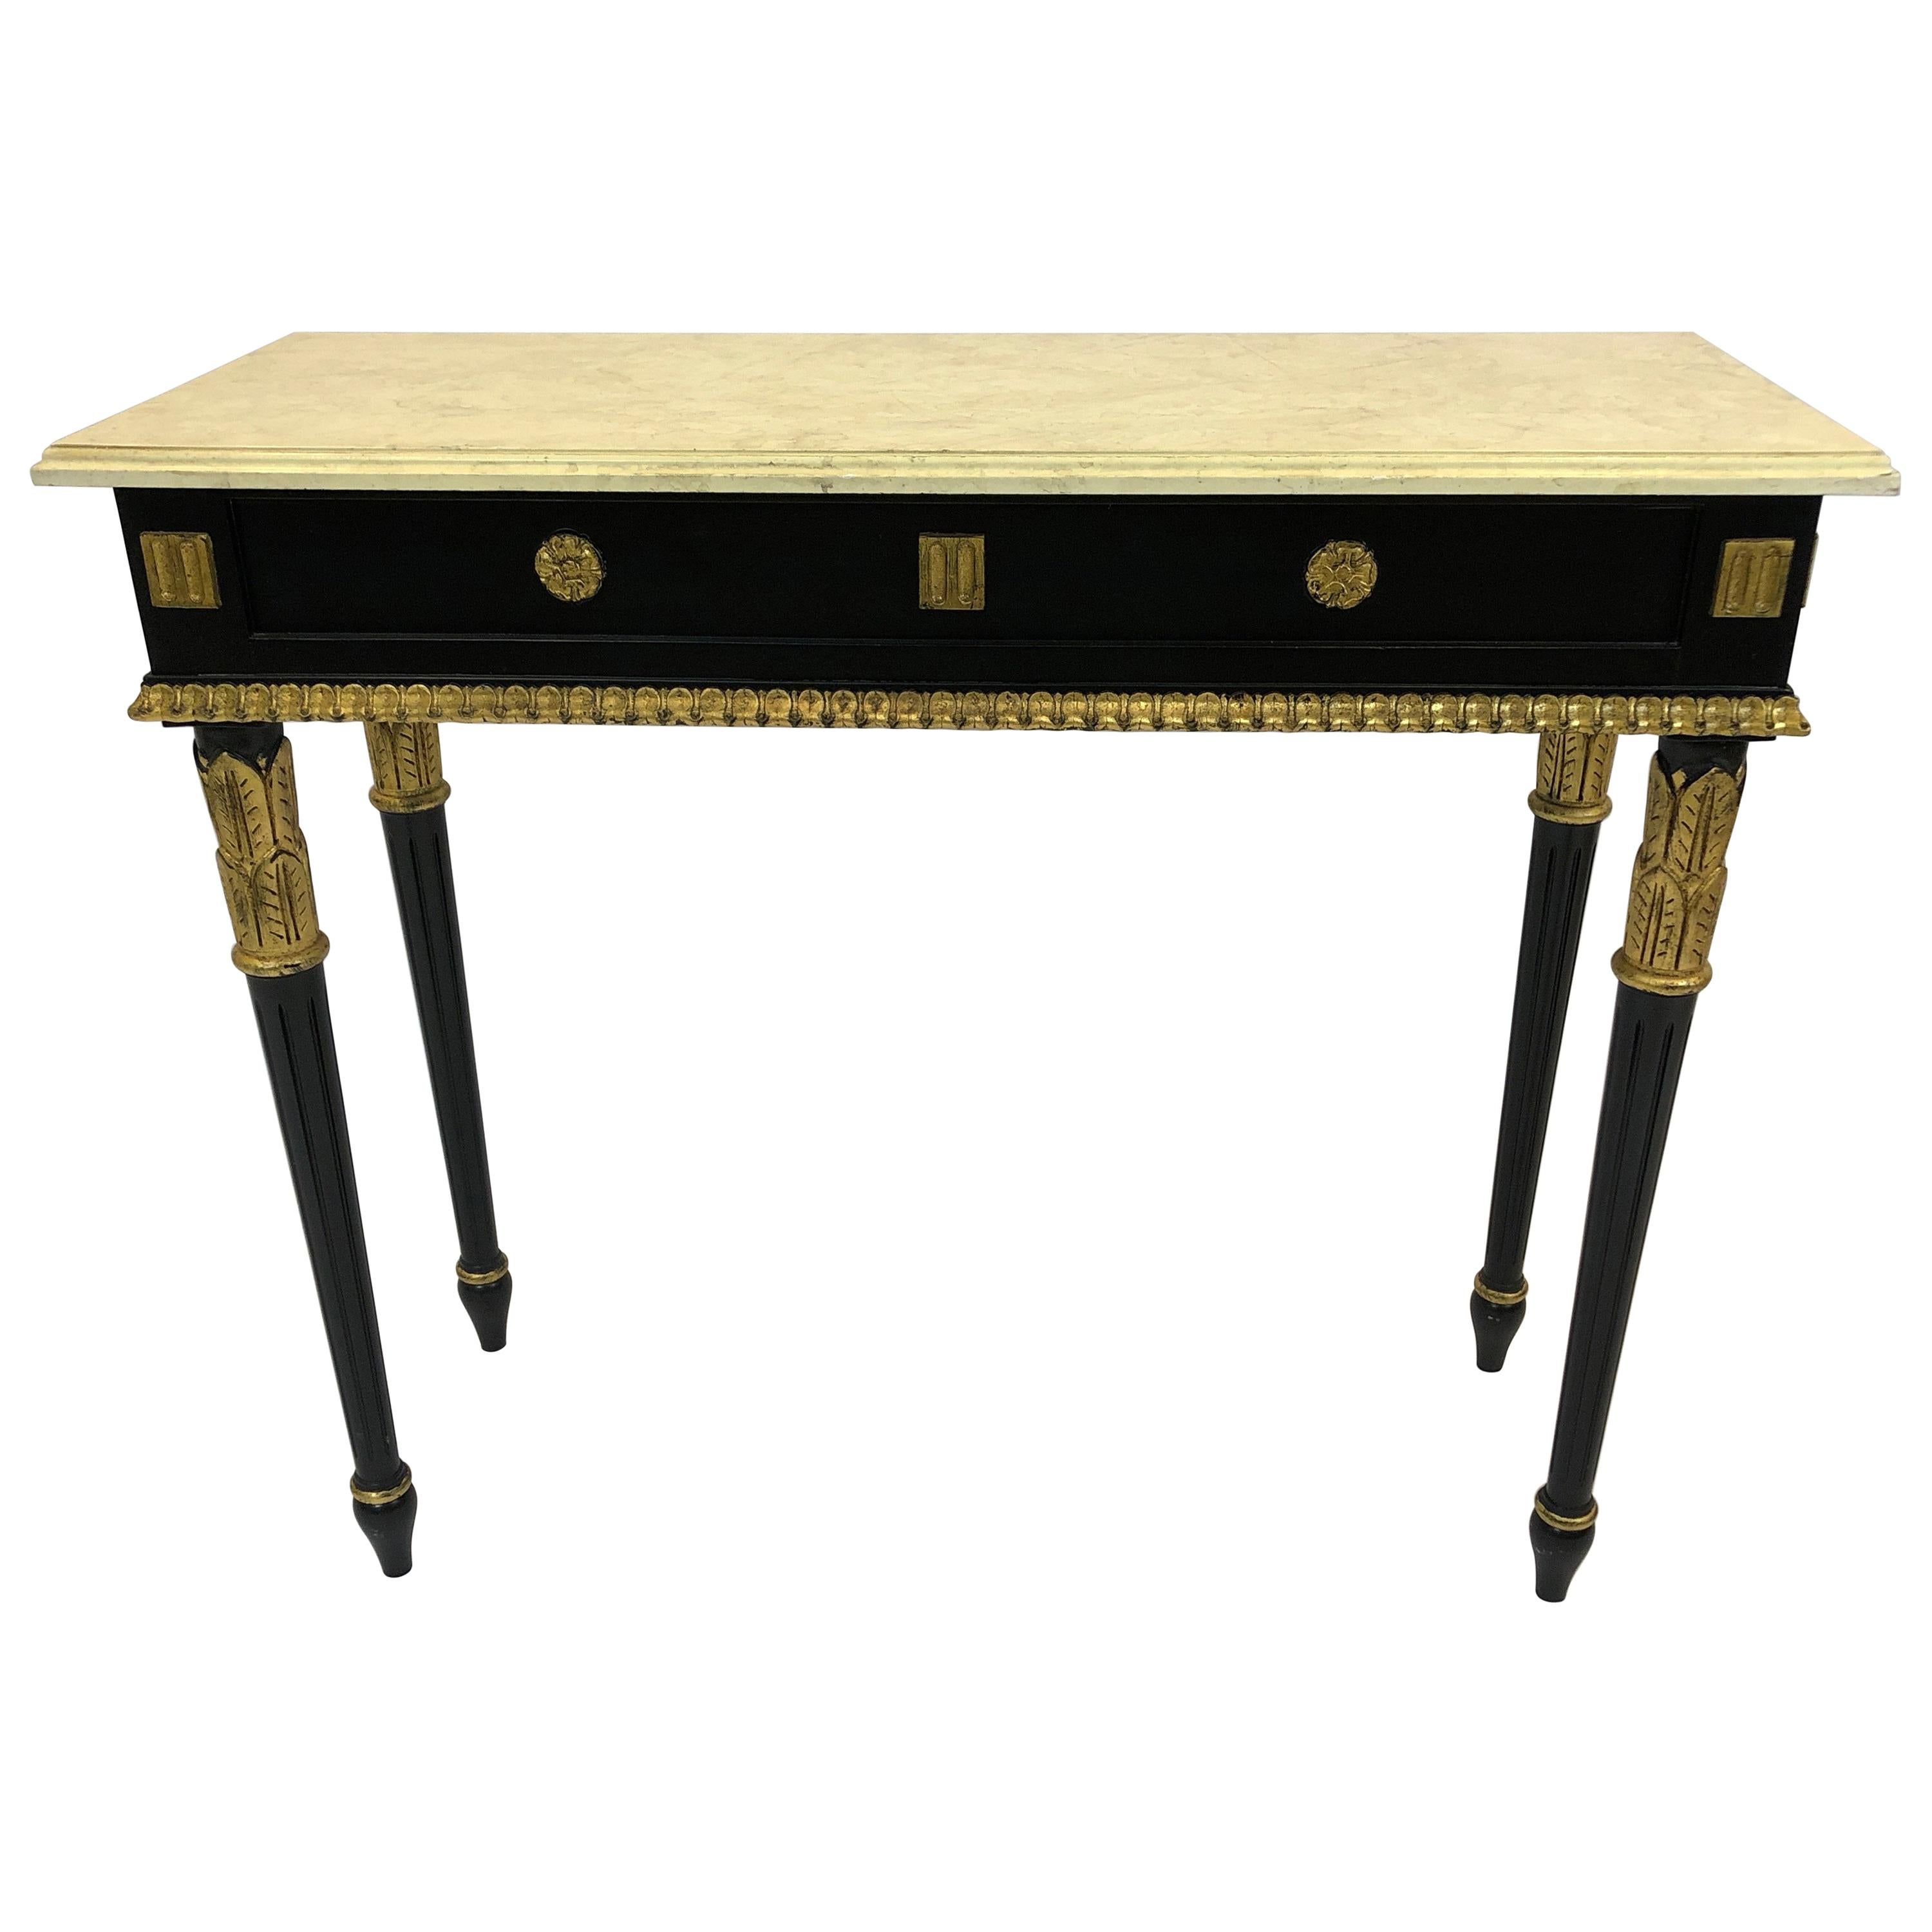 Glamorous Regency Style Black and Gilded Console Table with Faux Marble Top